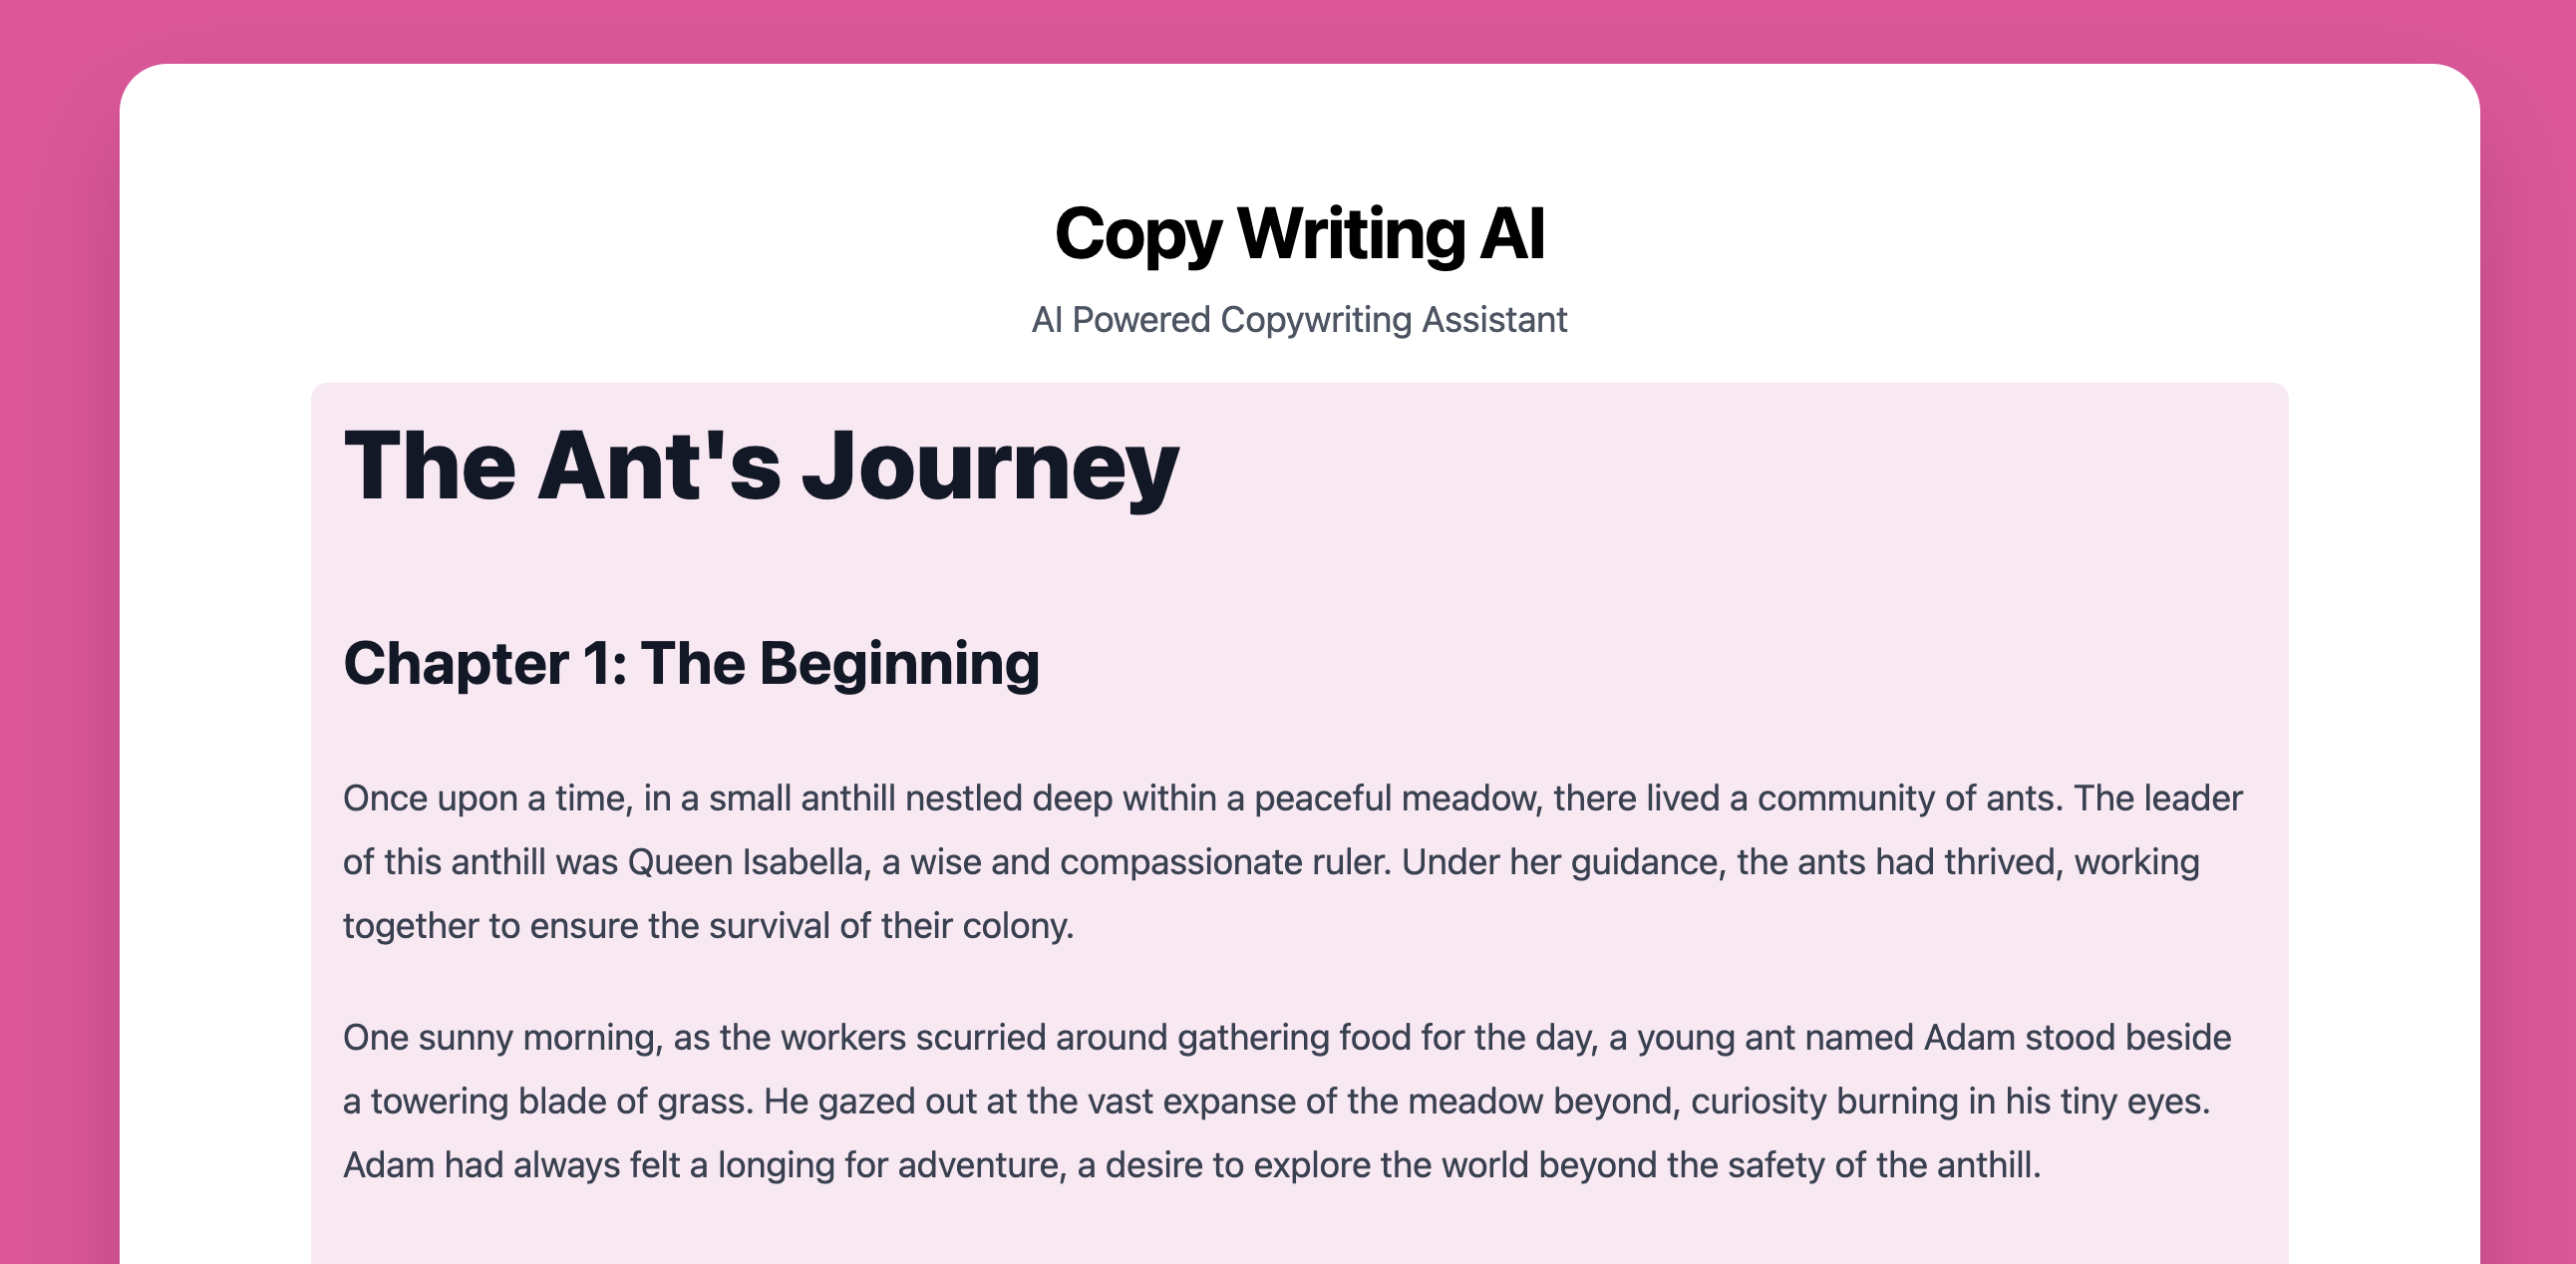 Copy Writing Artificial Intelligence (AI) Powered Copywriting Assistant by Eric David Smith